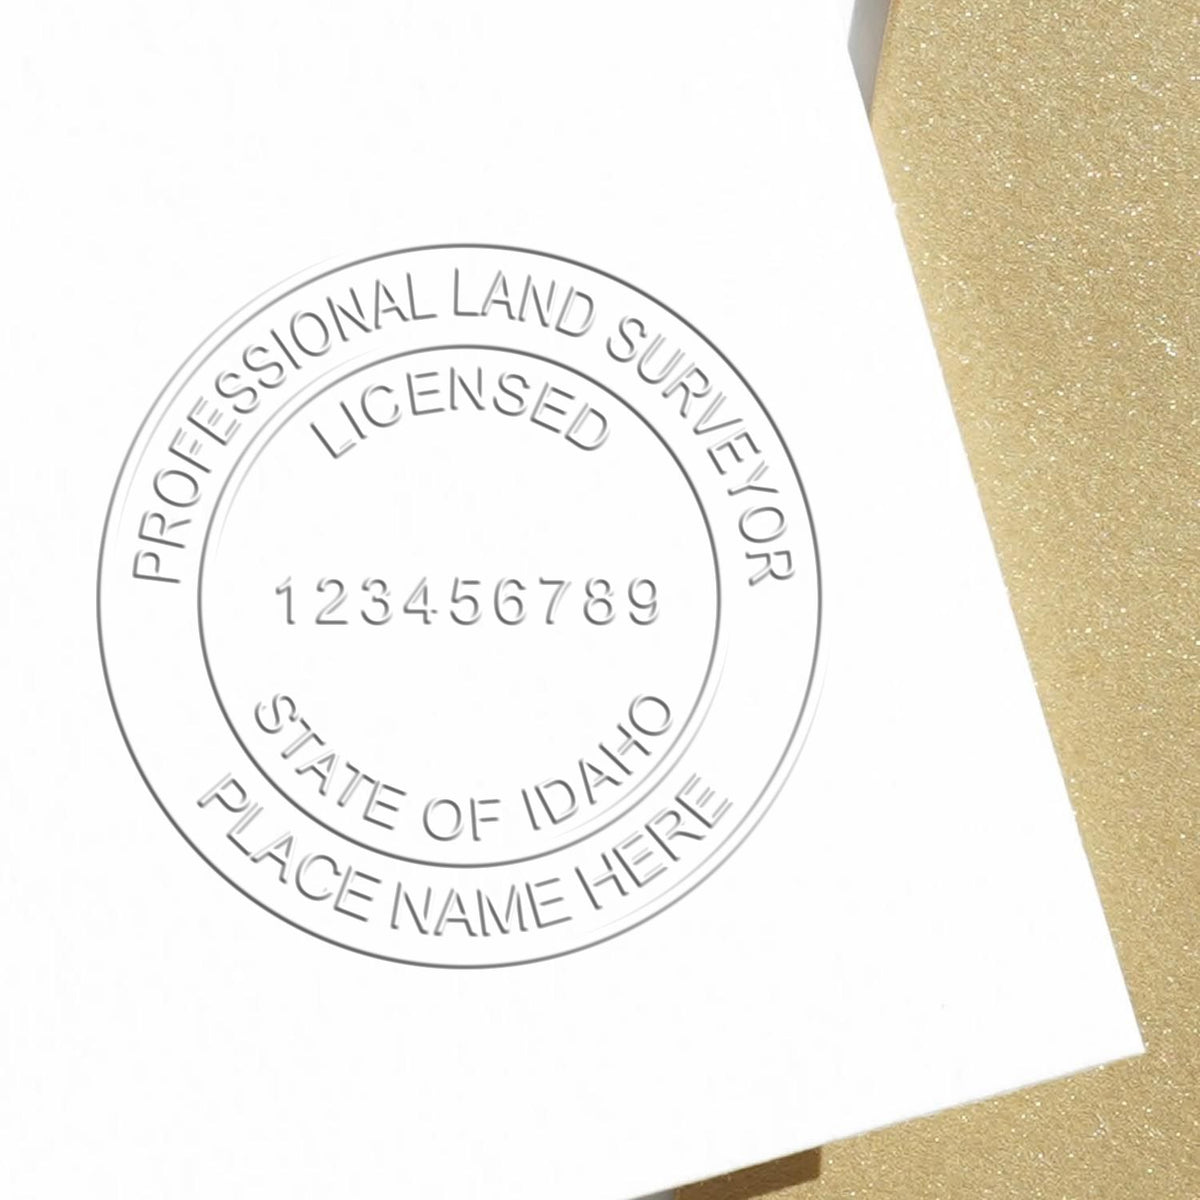 A photograph of the Hybrid Idaho Land Surveyor Seal stamp impression reveals a vivid, professional image of the on paper.